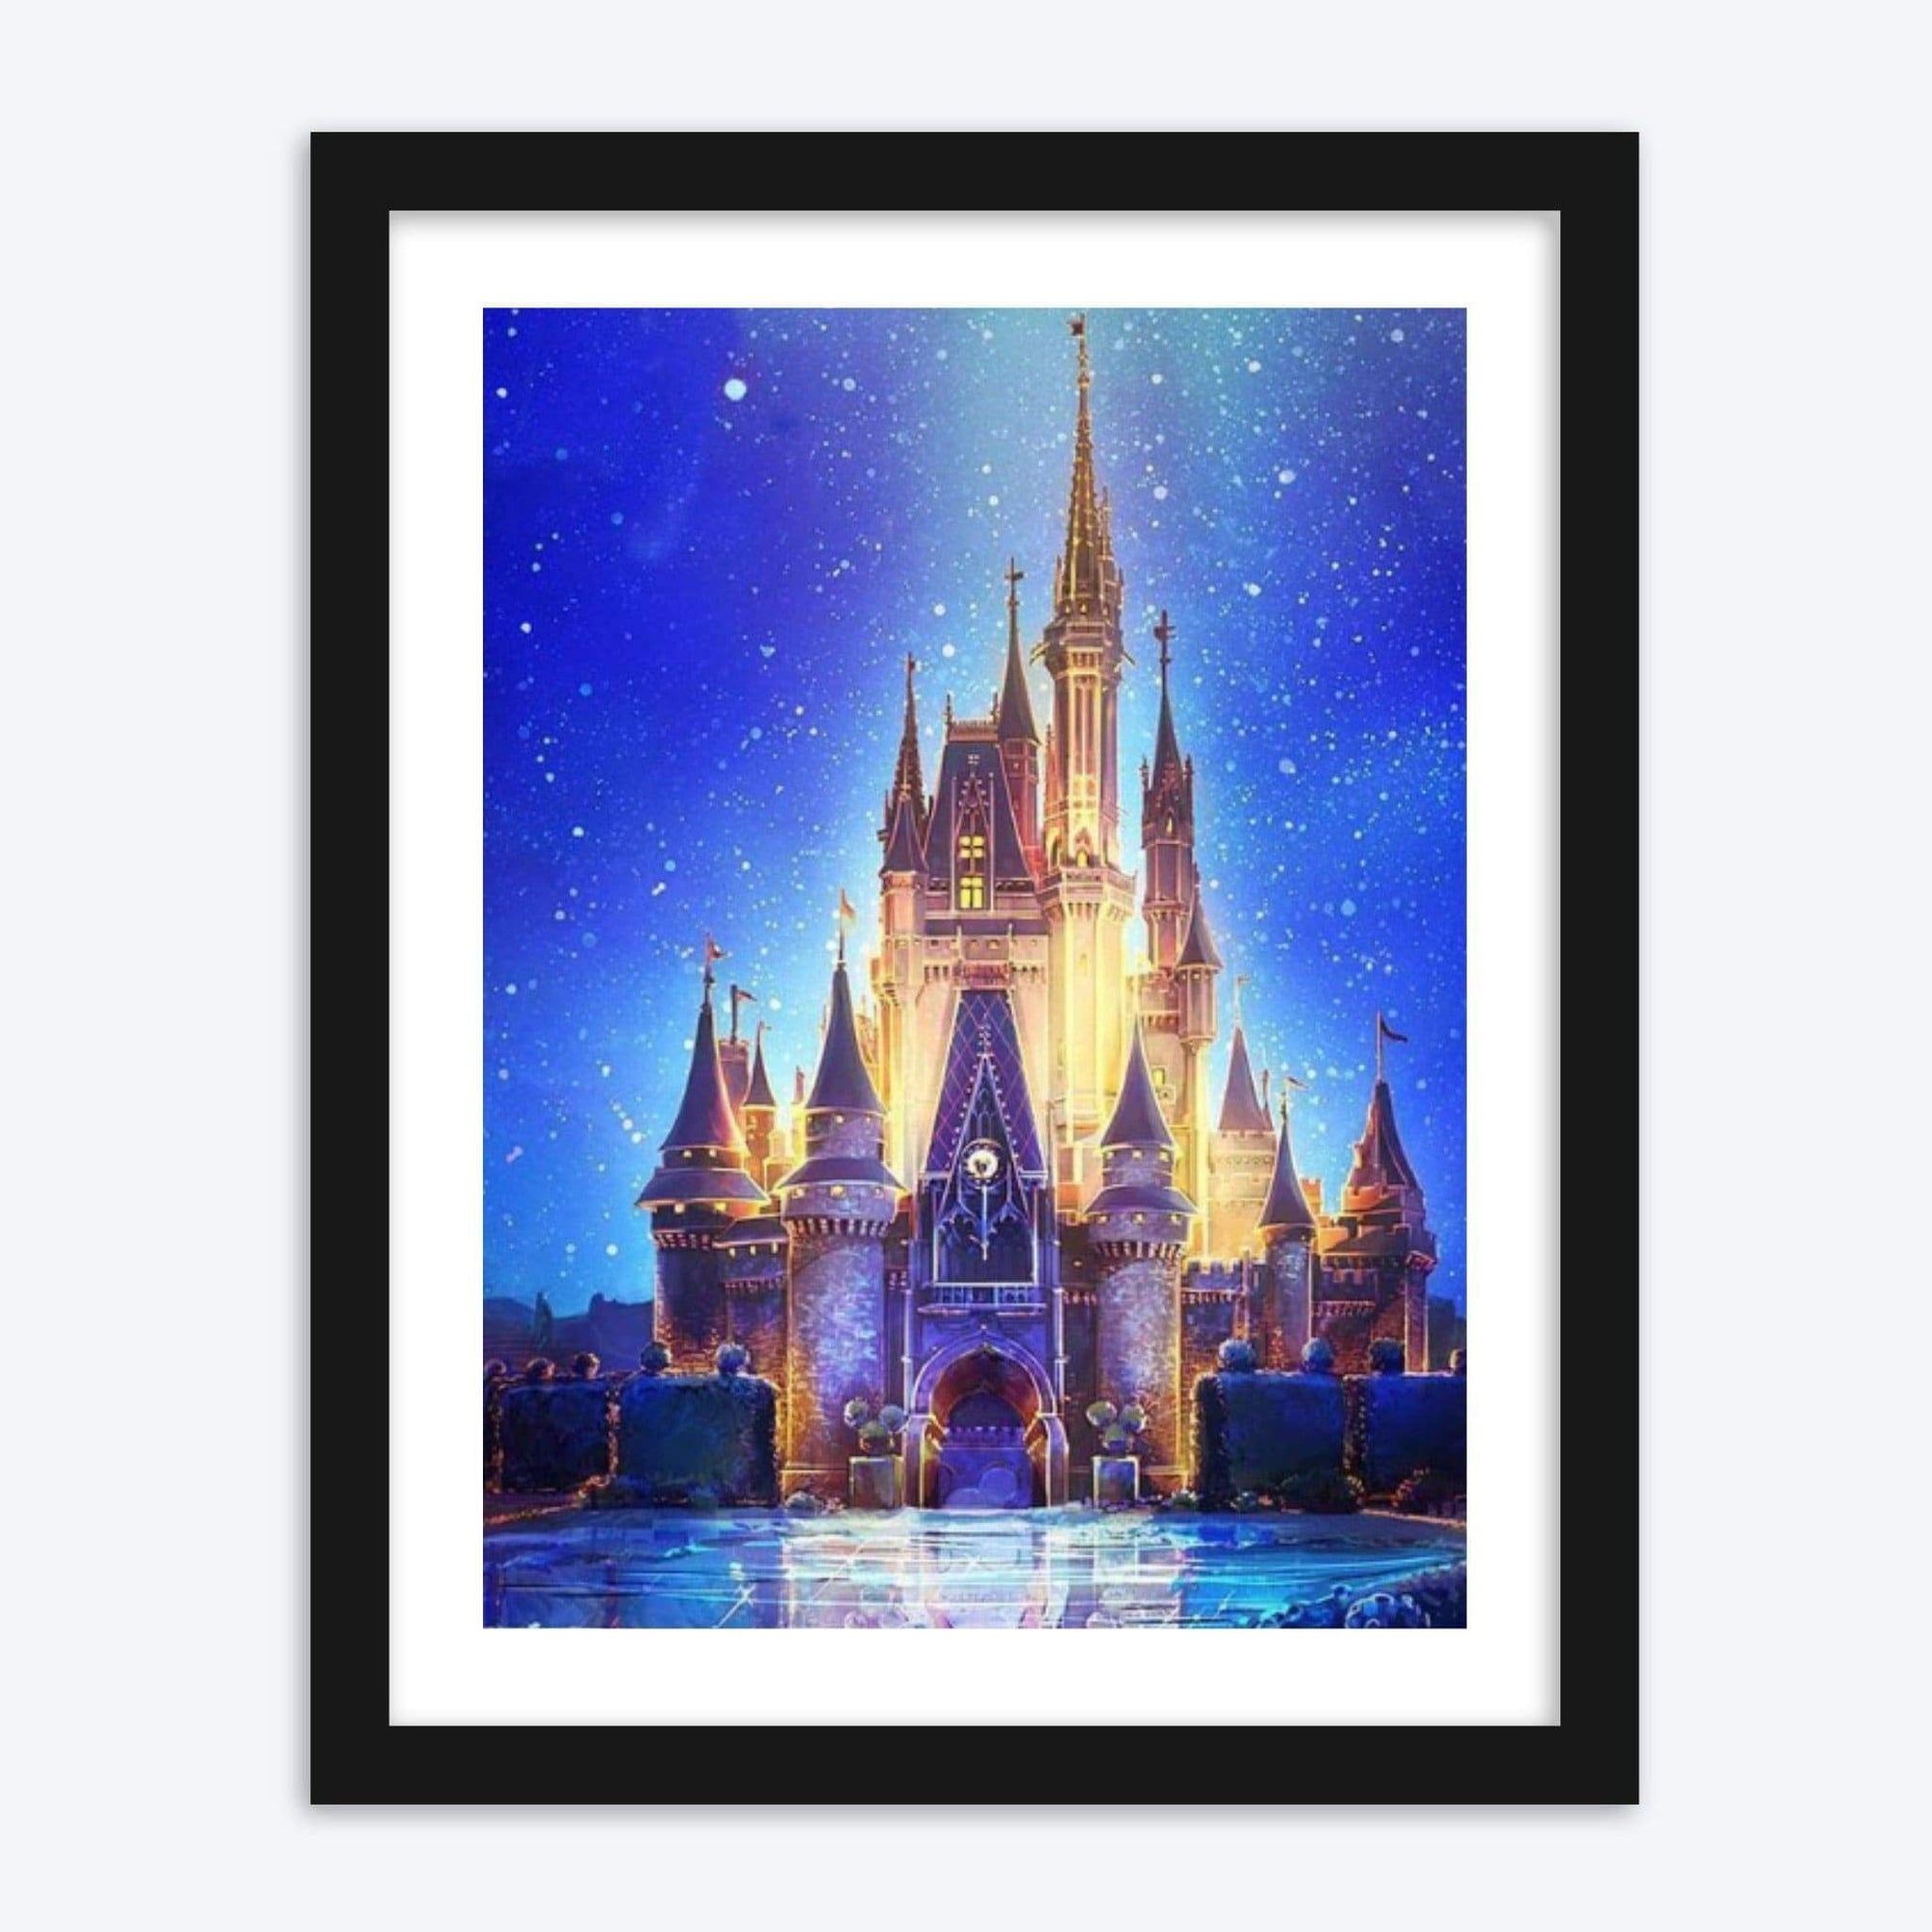 DIY Disney Magic Kingdom 5D Diamond Painting by Number Kit Picture Craft  NEW